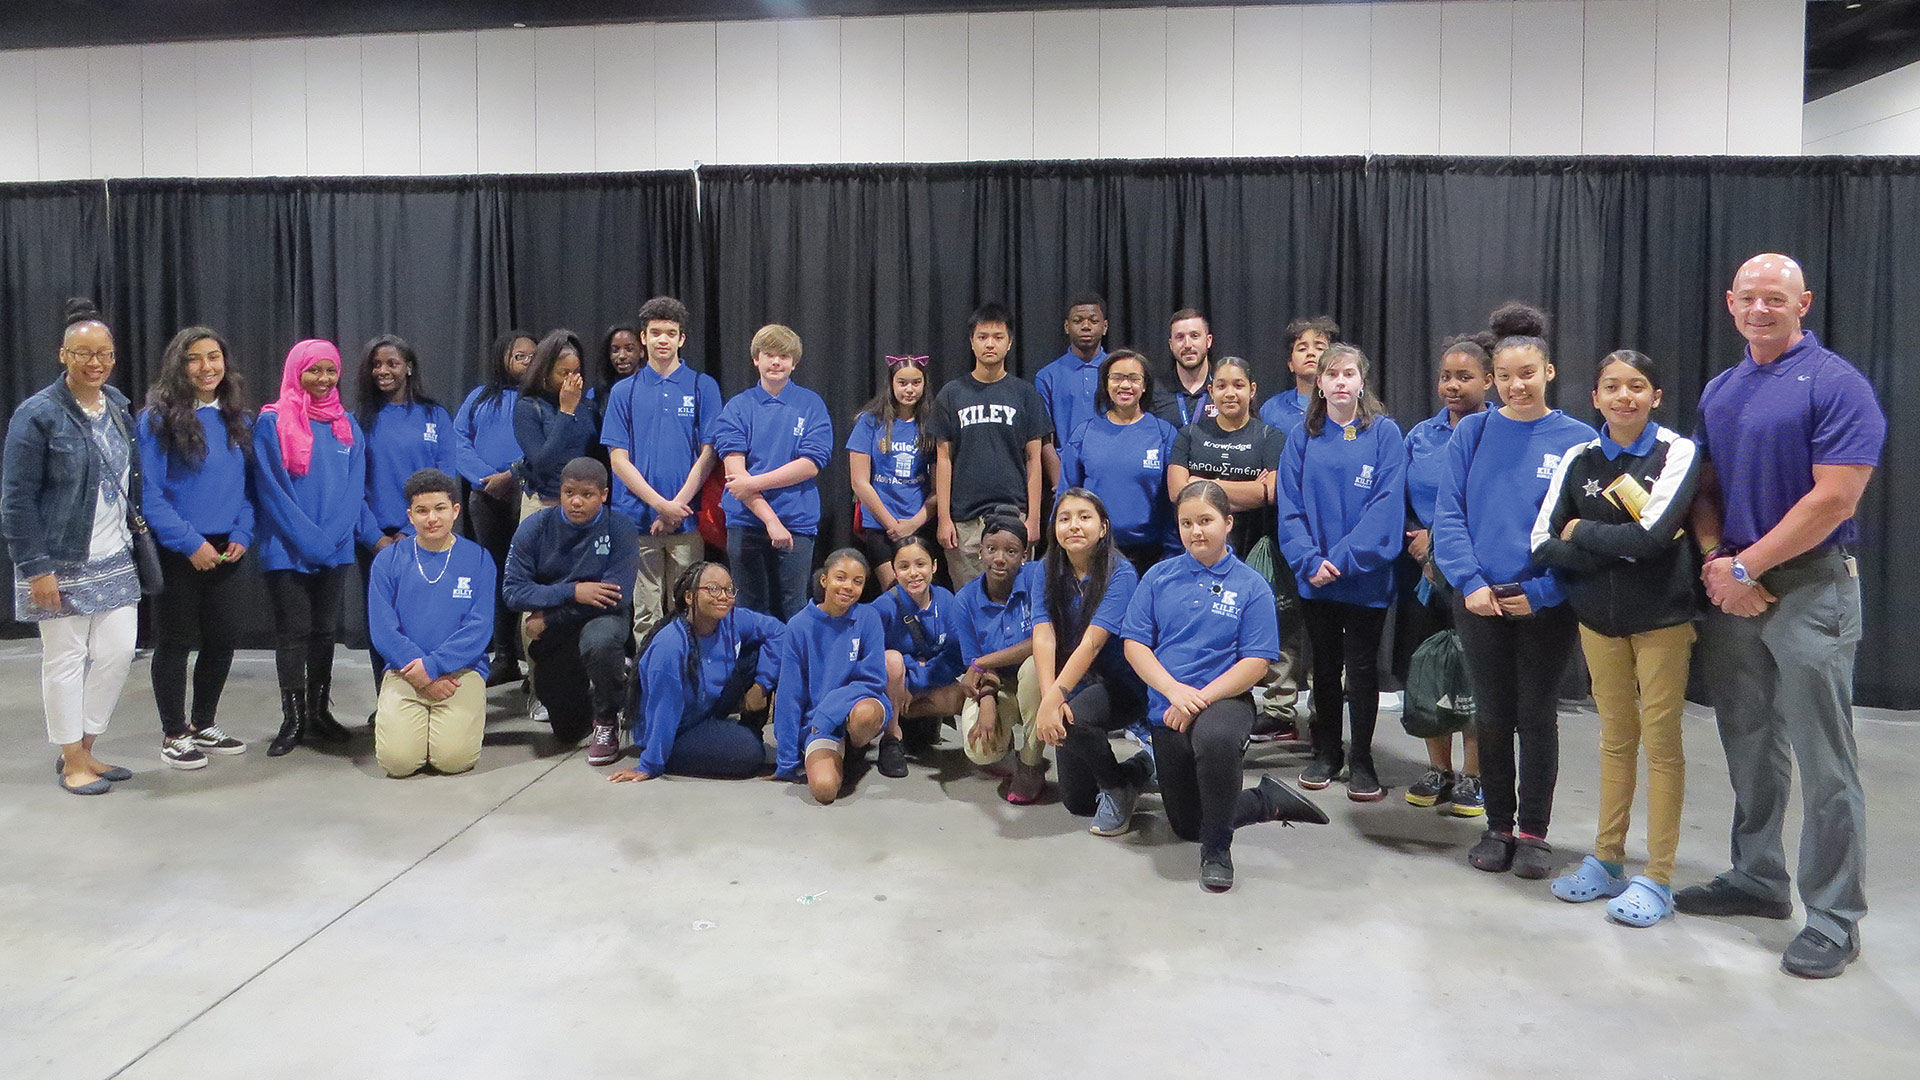 students from M. Marcus Kiley Middle School in Springfield pose for a group shot